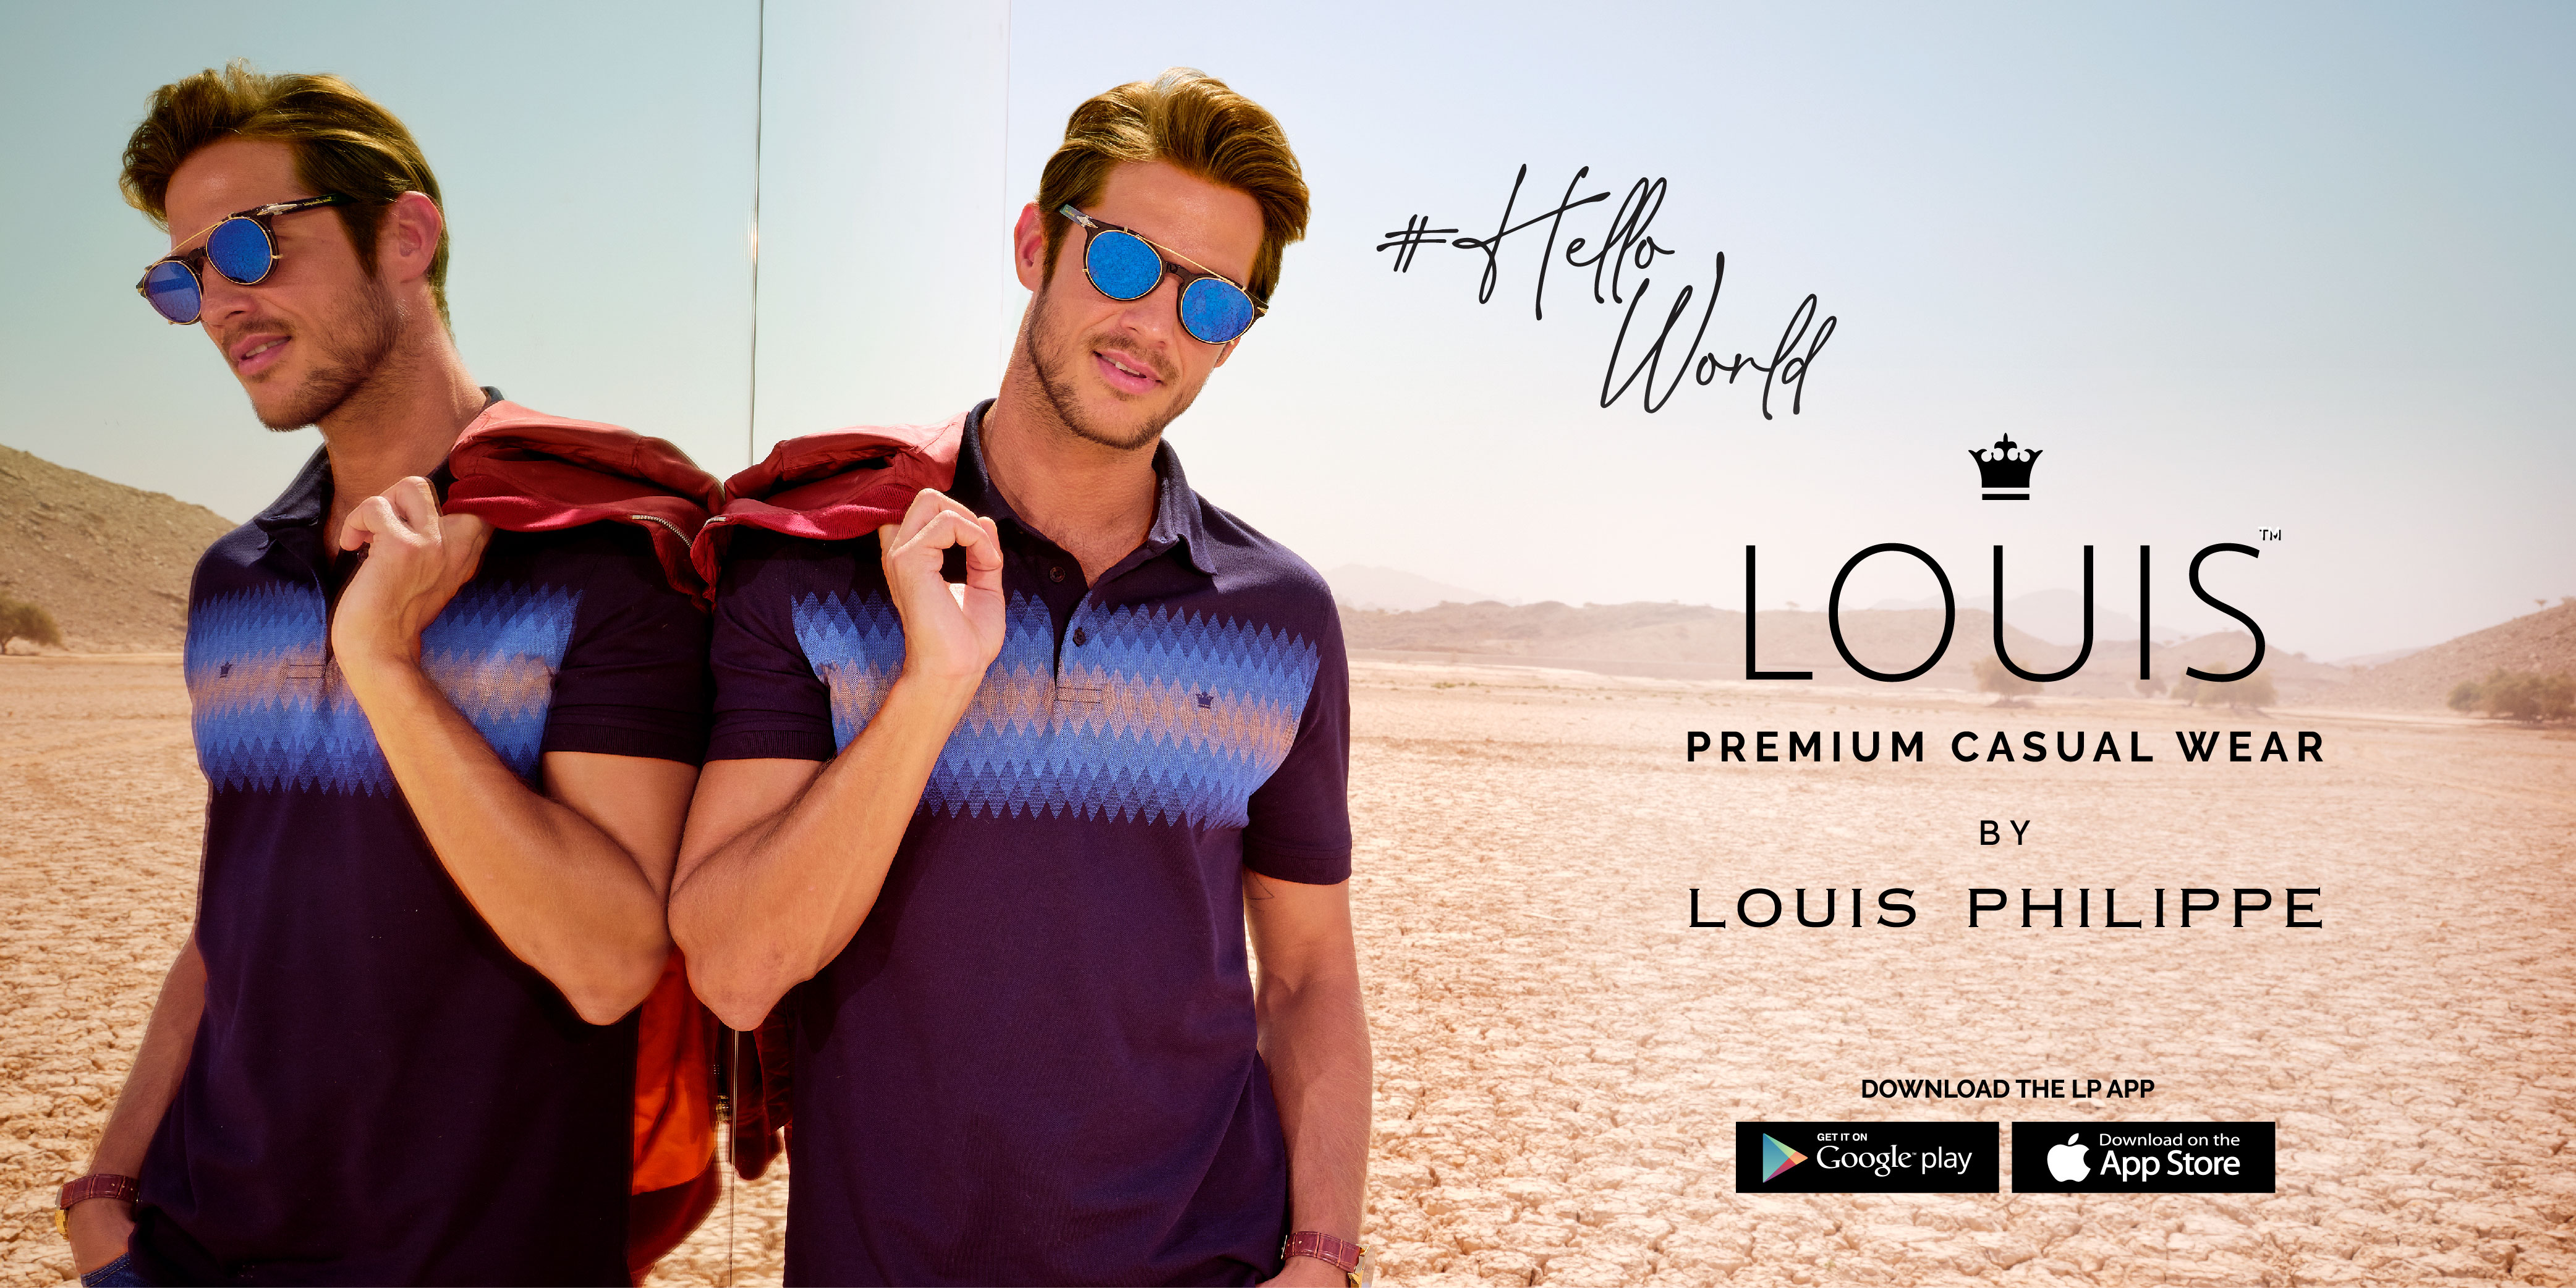 Louis Philippe brings luxury to casual fashion with the launch of “LOUIS” Premium Casual Wear decoding=